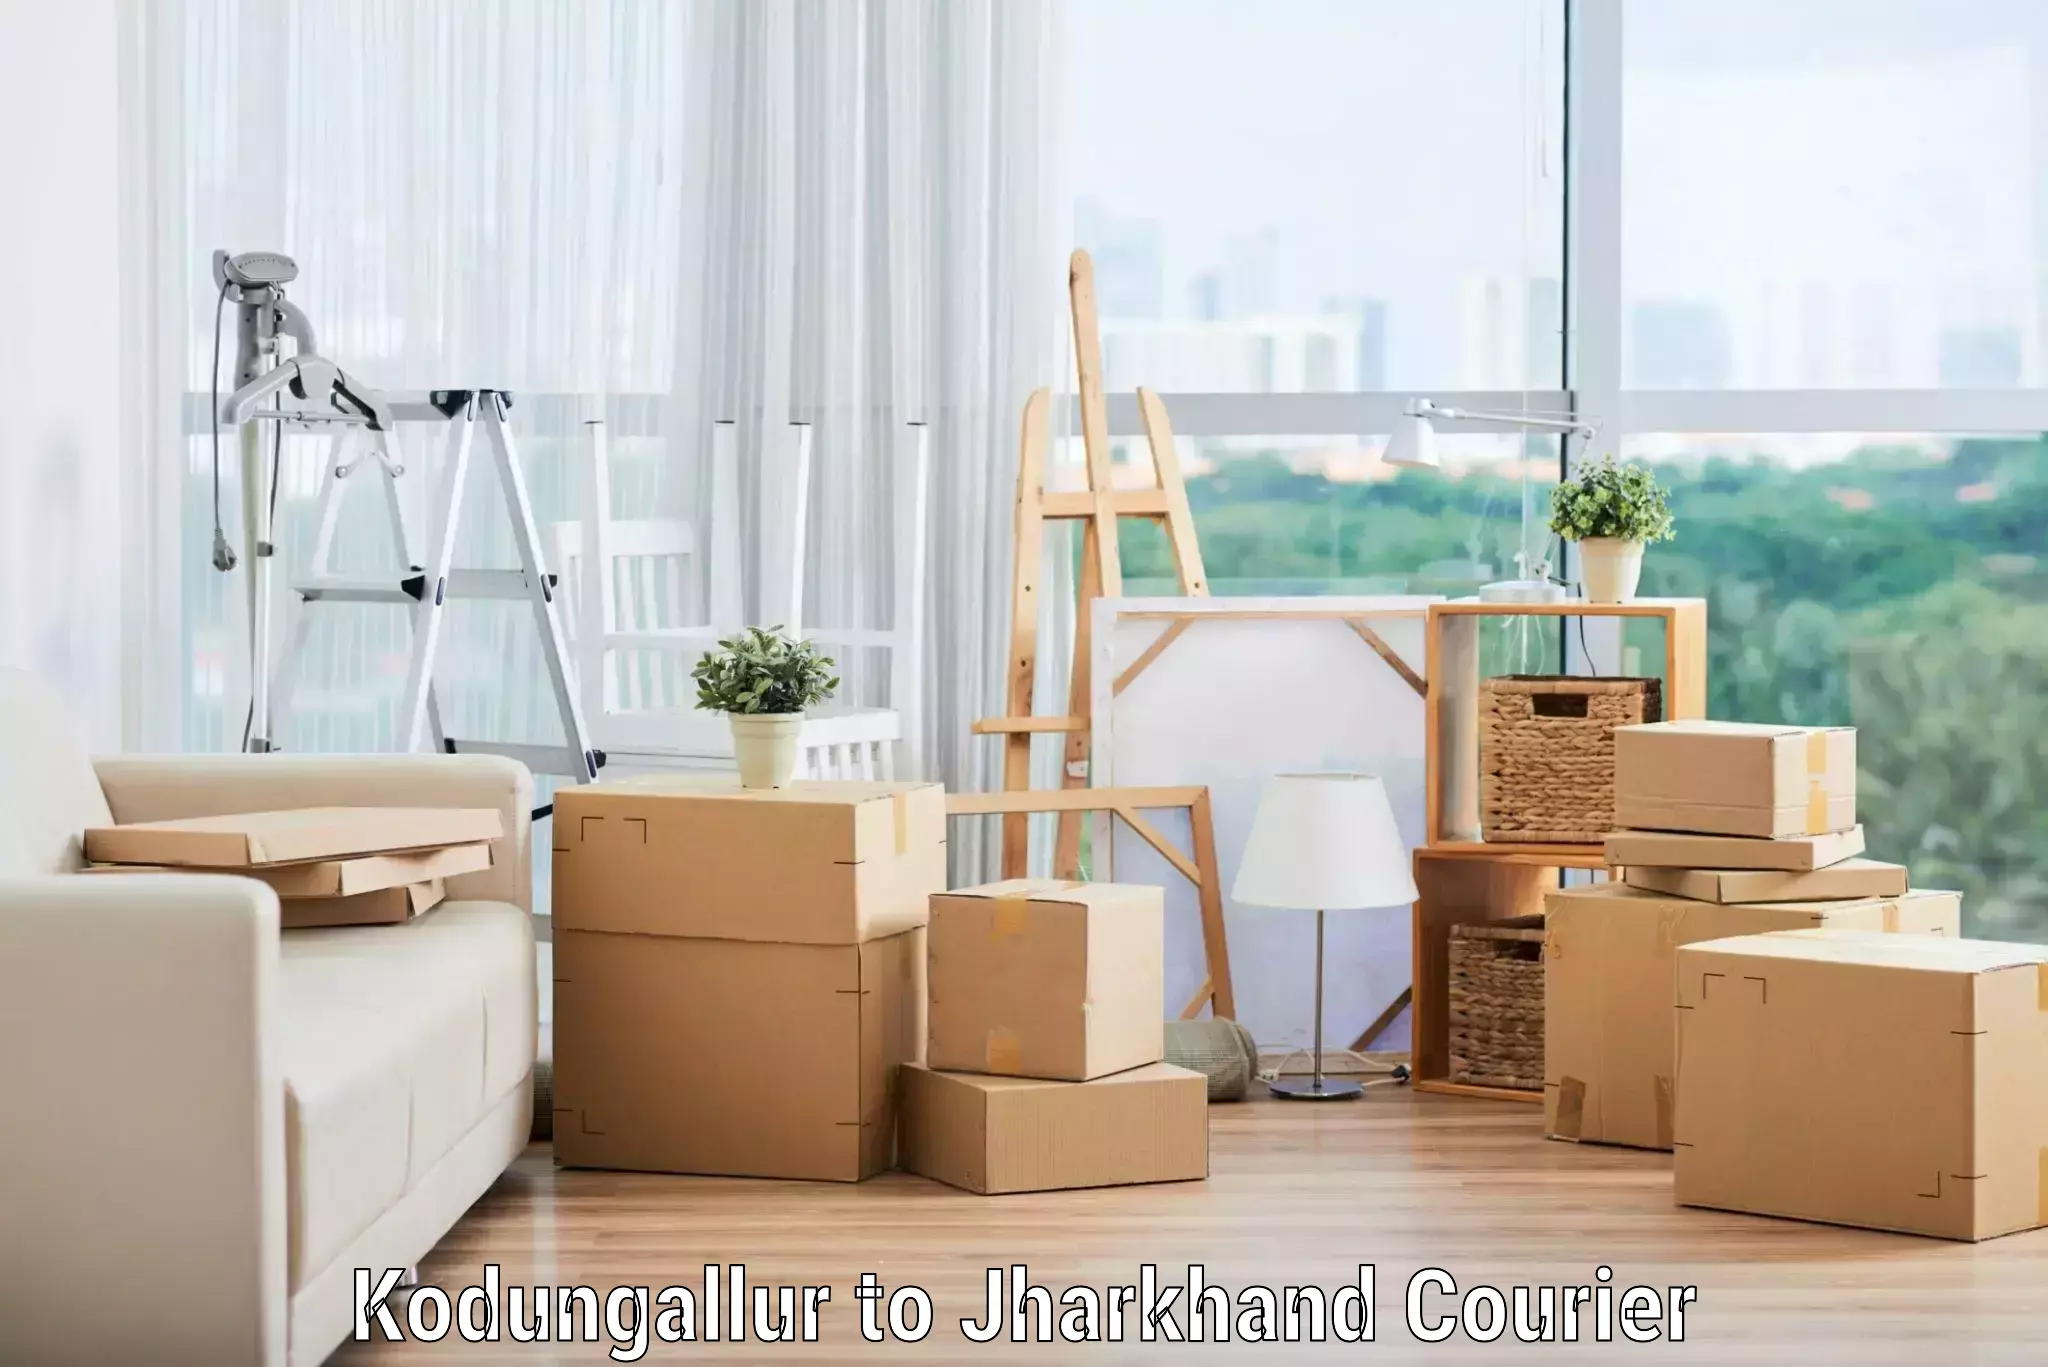 Furniture delivery service Kodungallur to Topchanchi